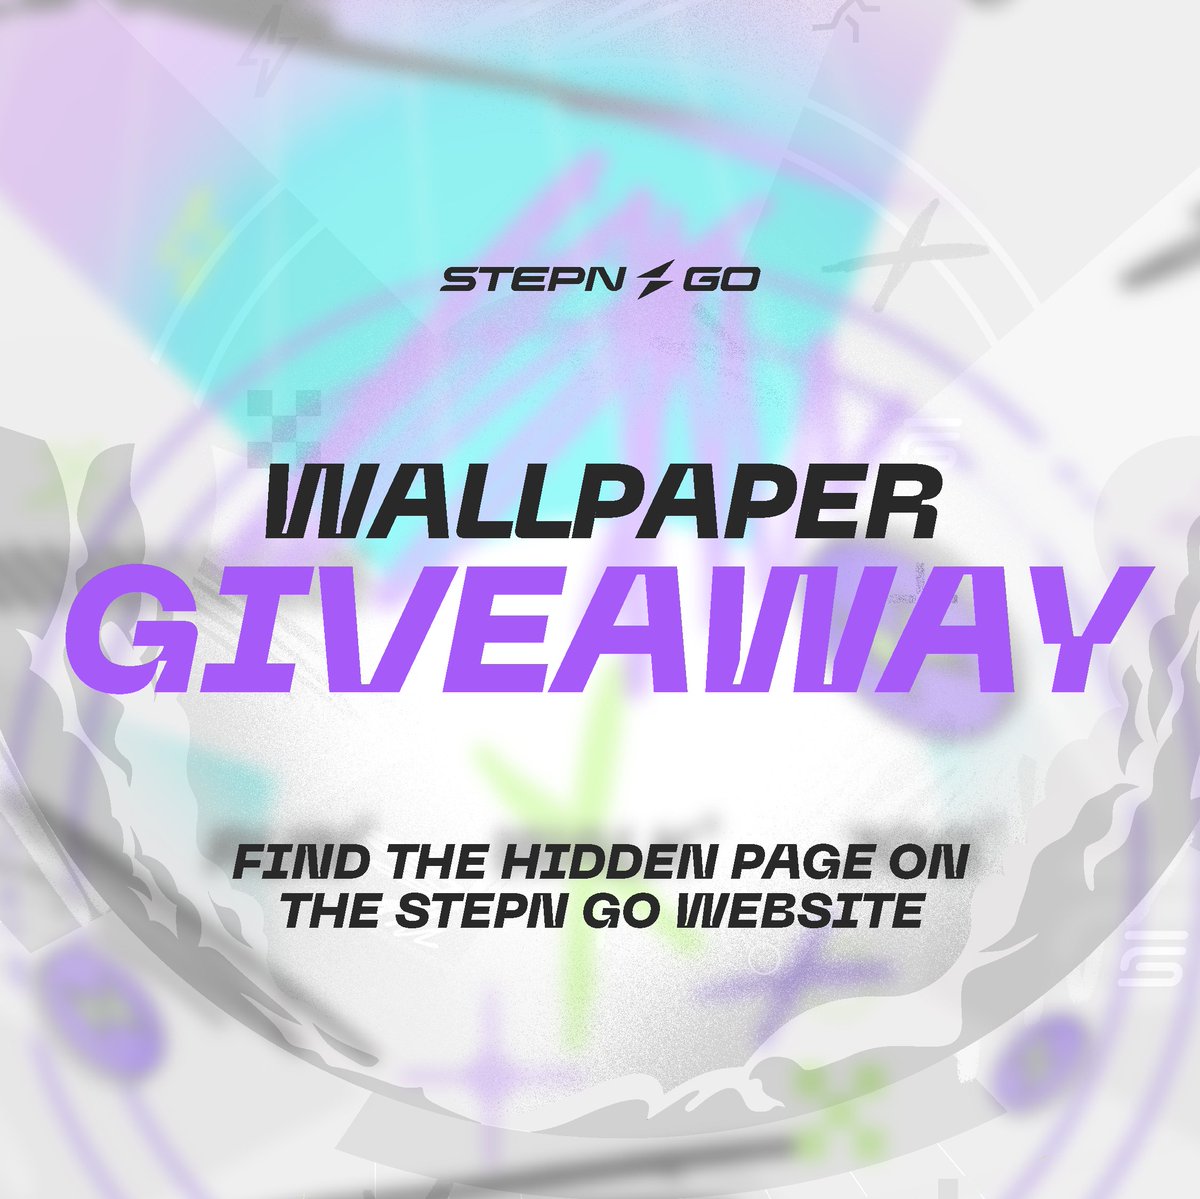 Calling our best detectives 🔍 We’ve hidden a secret page on go.stepn.com! 👉 Find it, and you will receive an exclusive STEPN GO wallpaper for your mobile phone! To find the secret page, you’ll have to click on a certain icon 👀 But which one? Who knows! ⌛️ You